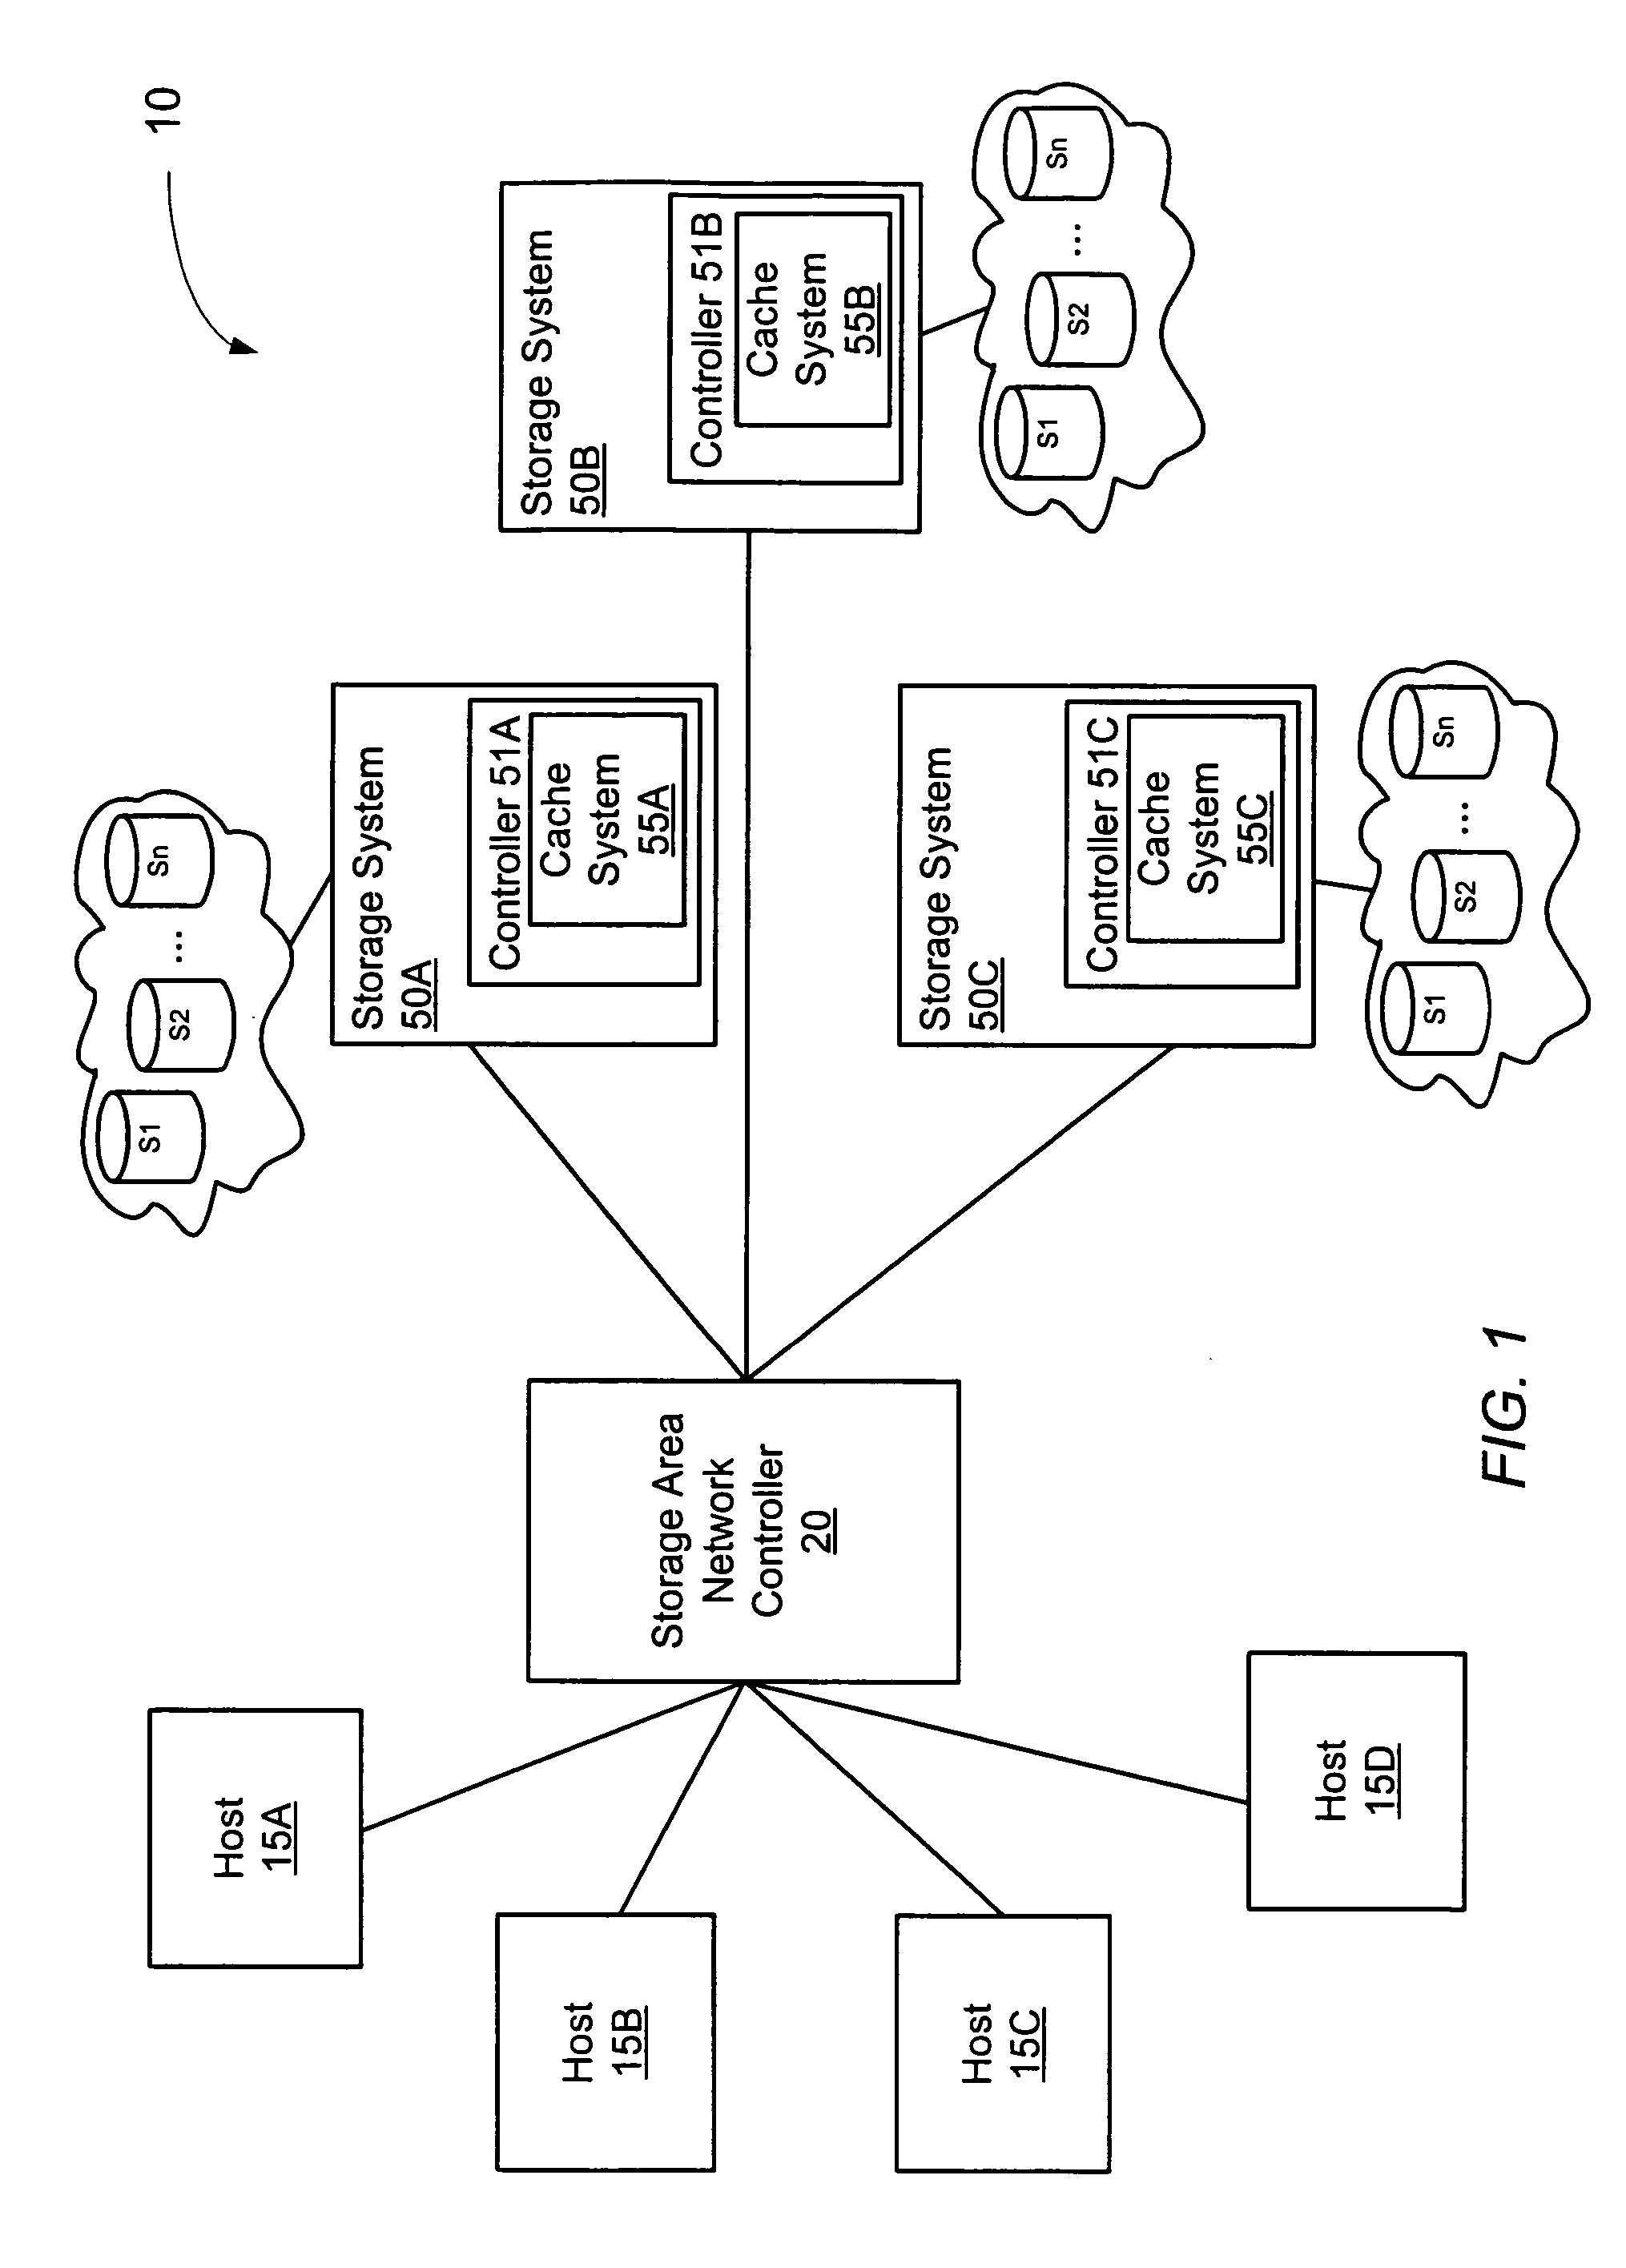 Storage system structure for storing relational cache metadata